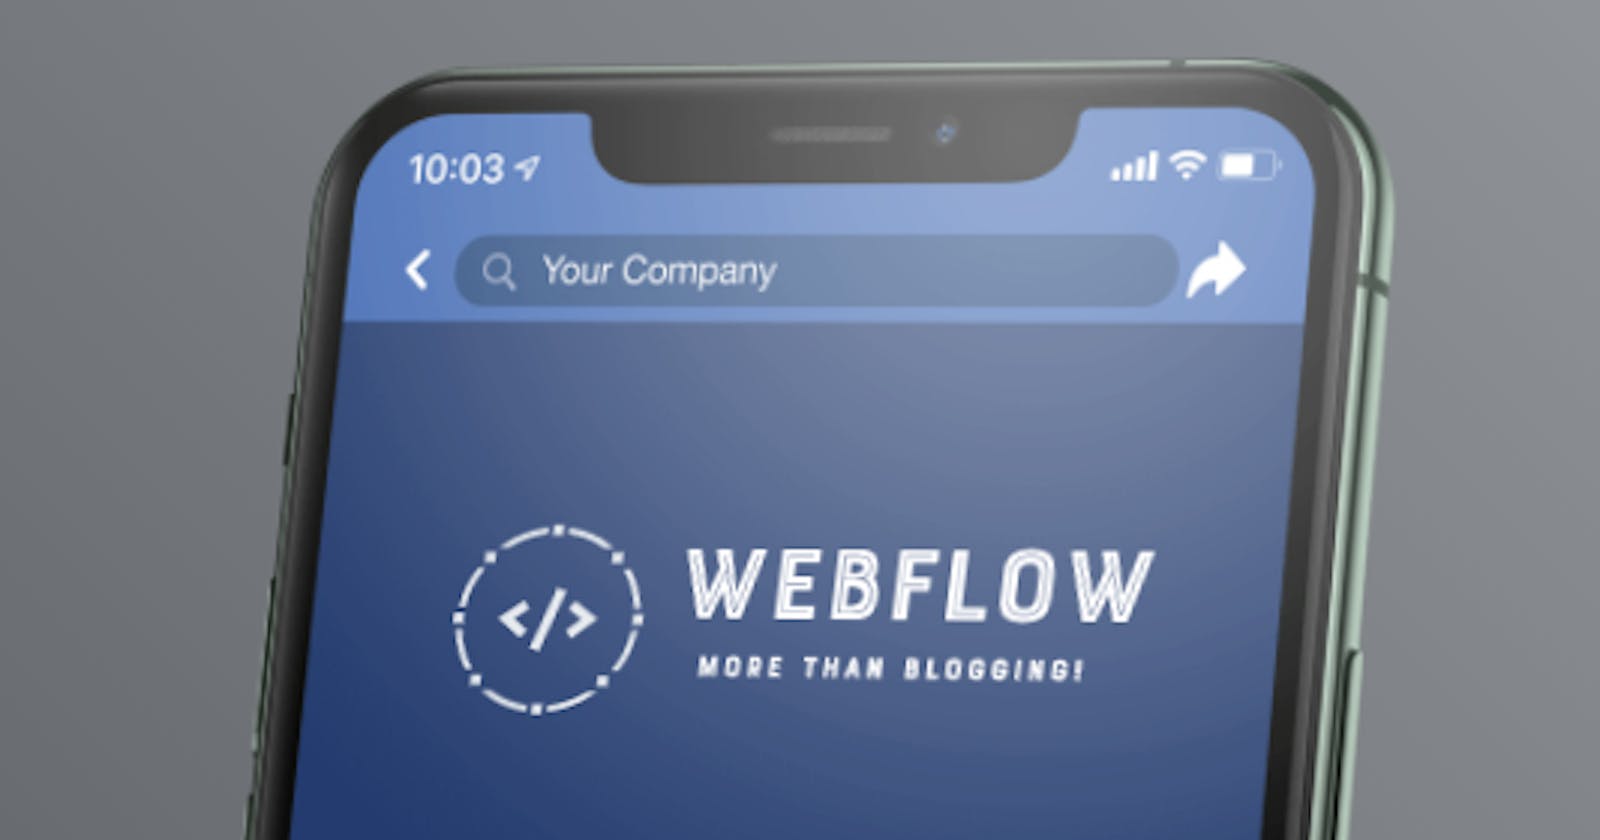 Webflow: What's all the buzz about?